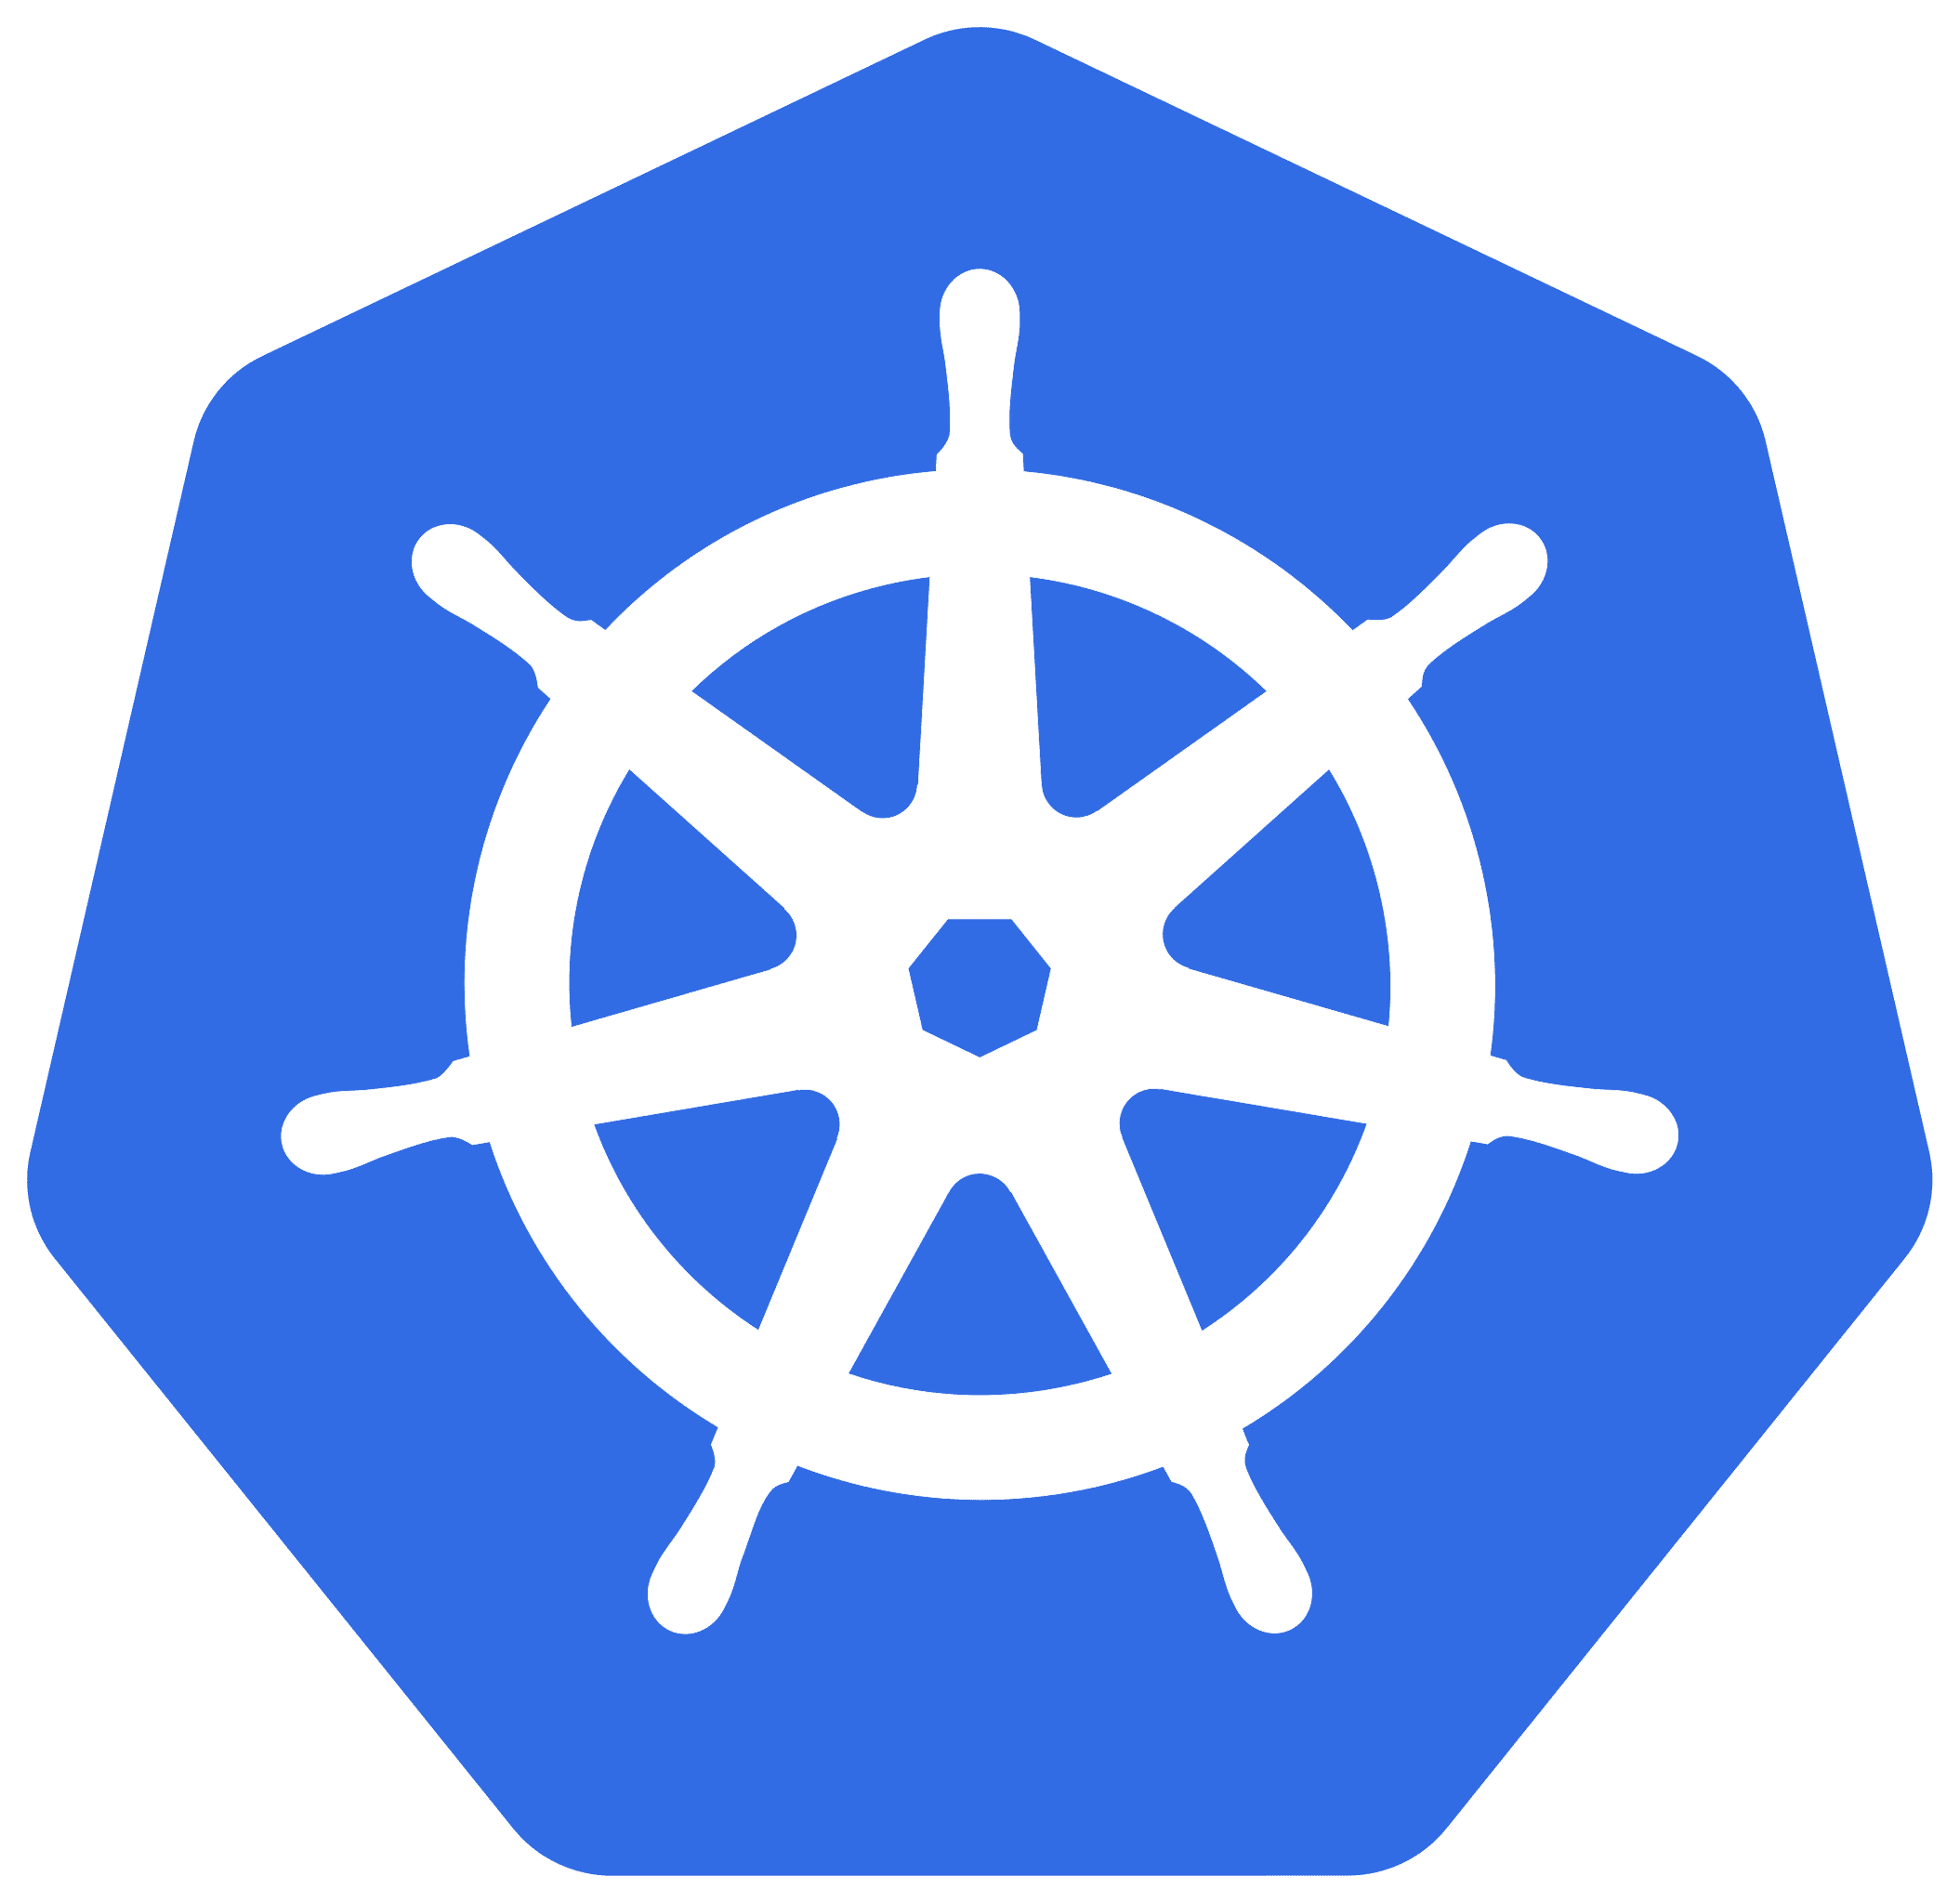 Kubernetes provides container orchestration